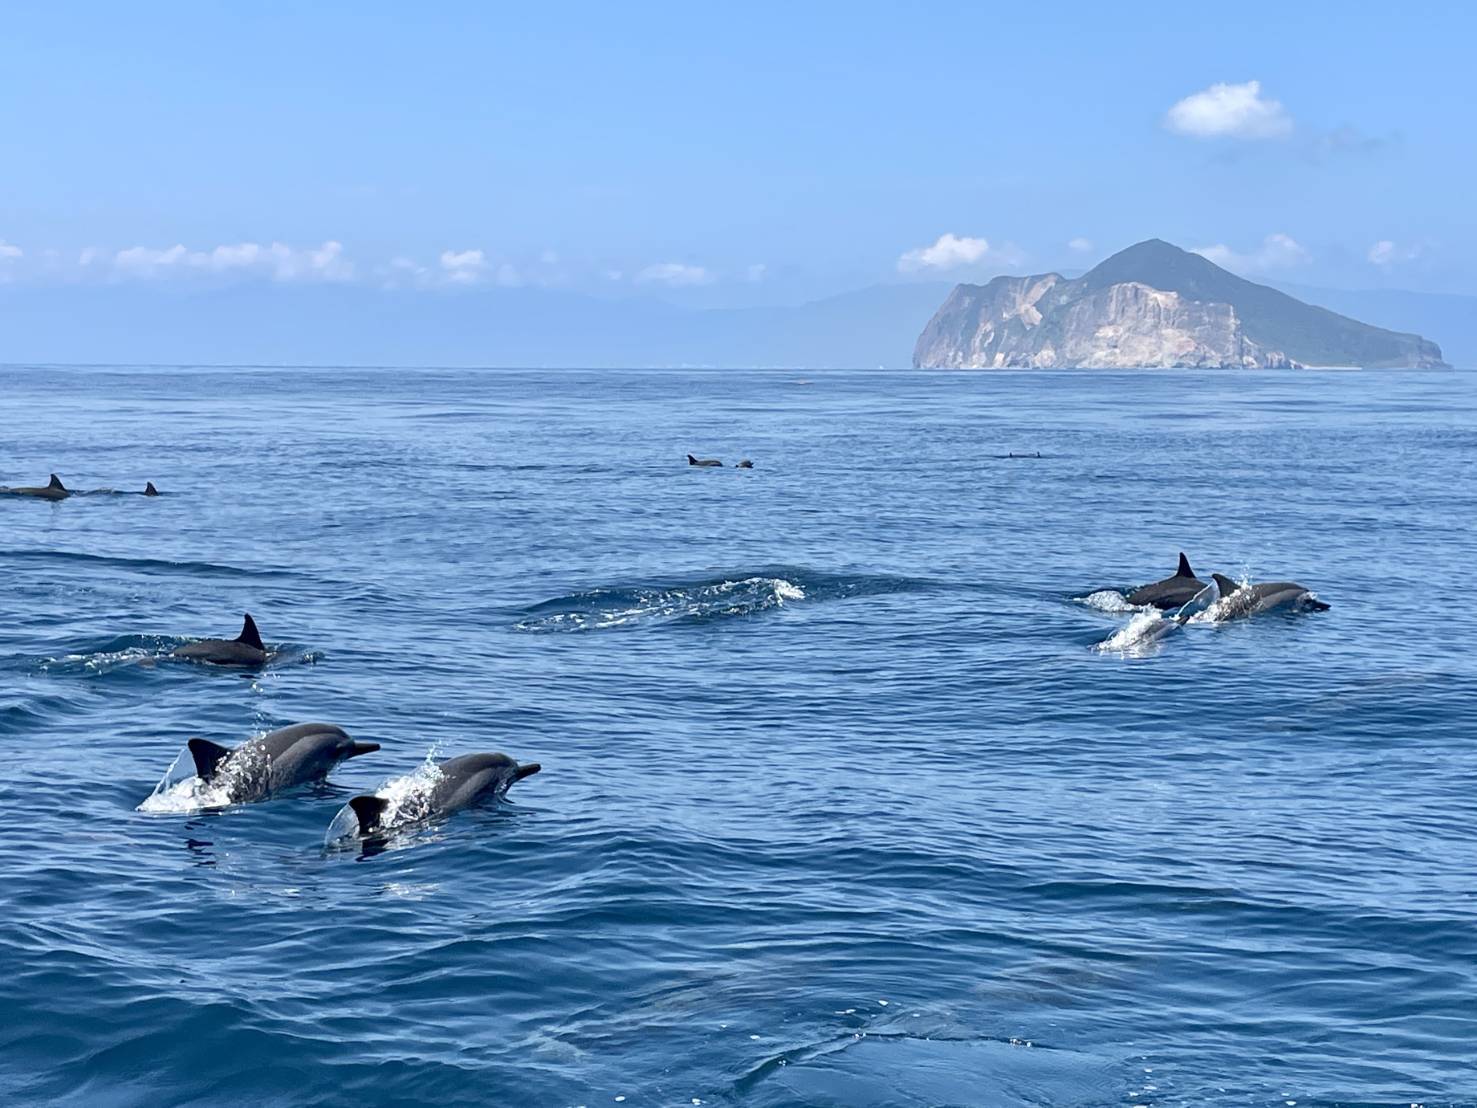 The best time to watch whales and dolphins is from April to October every year.